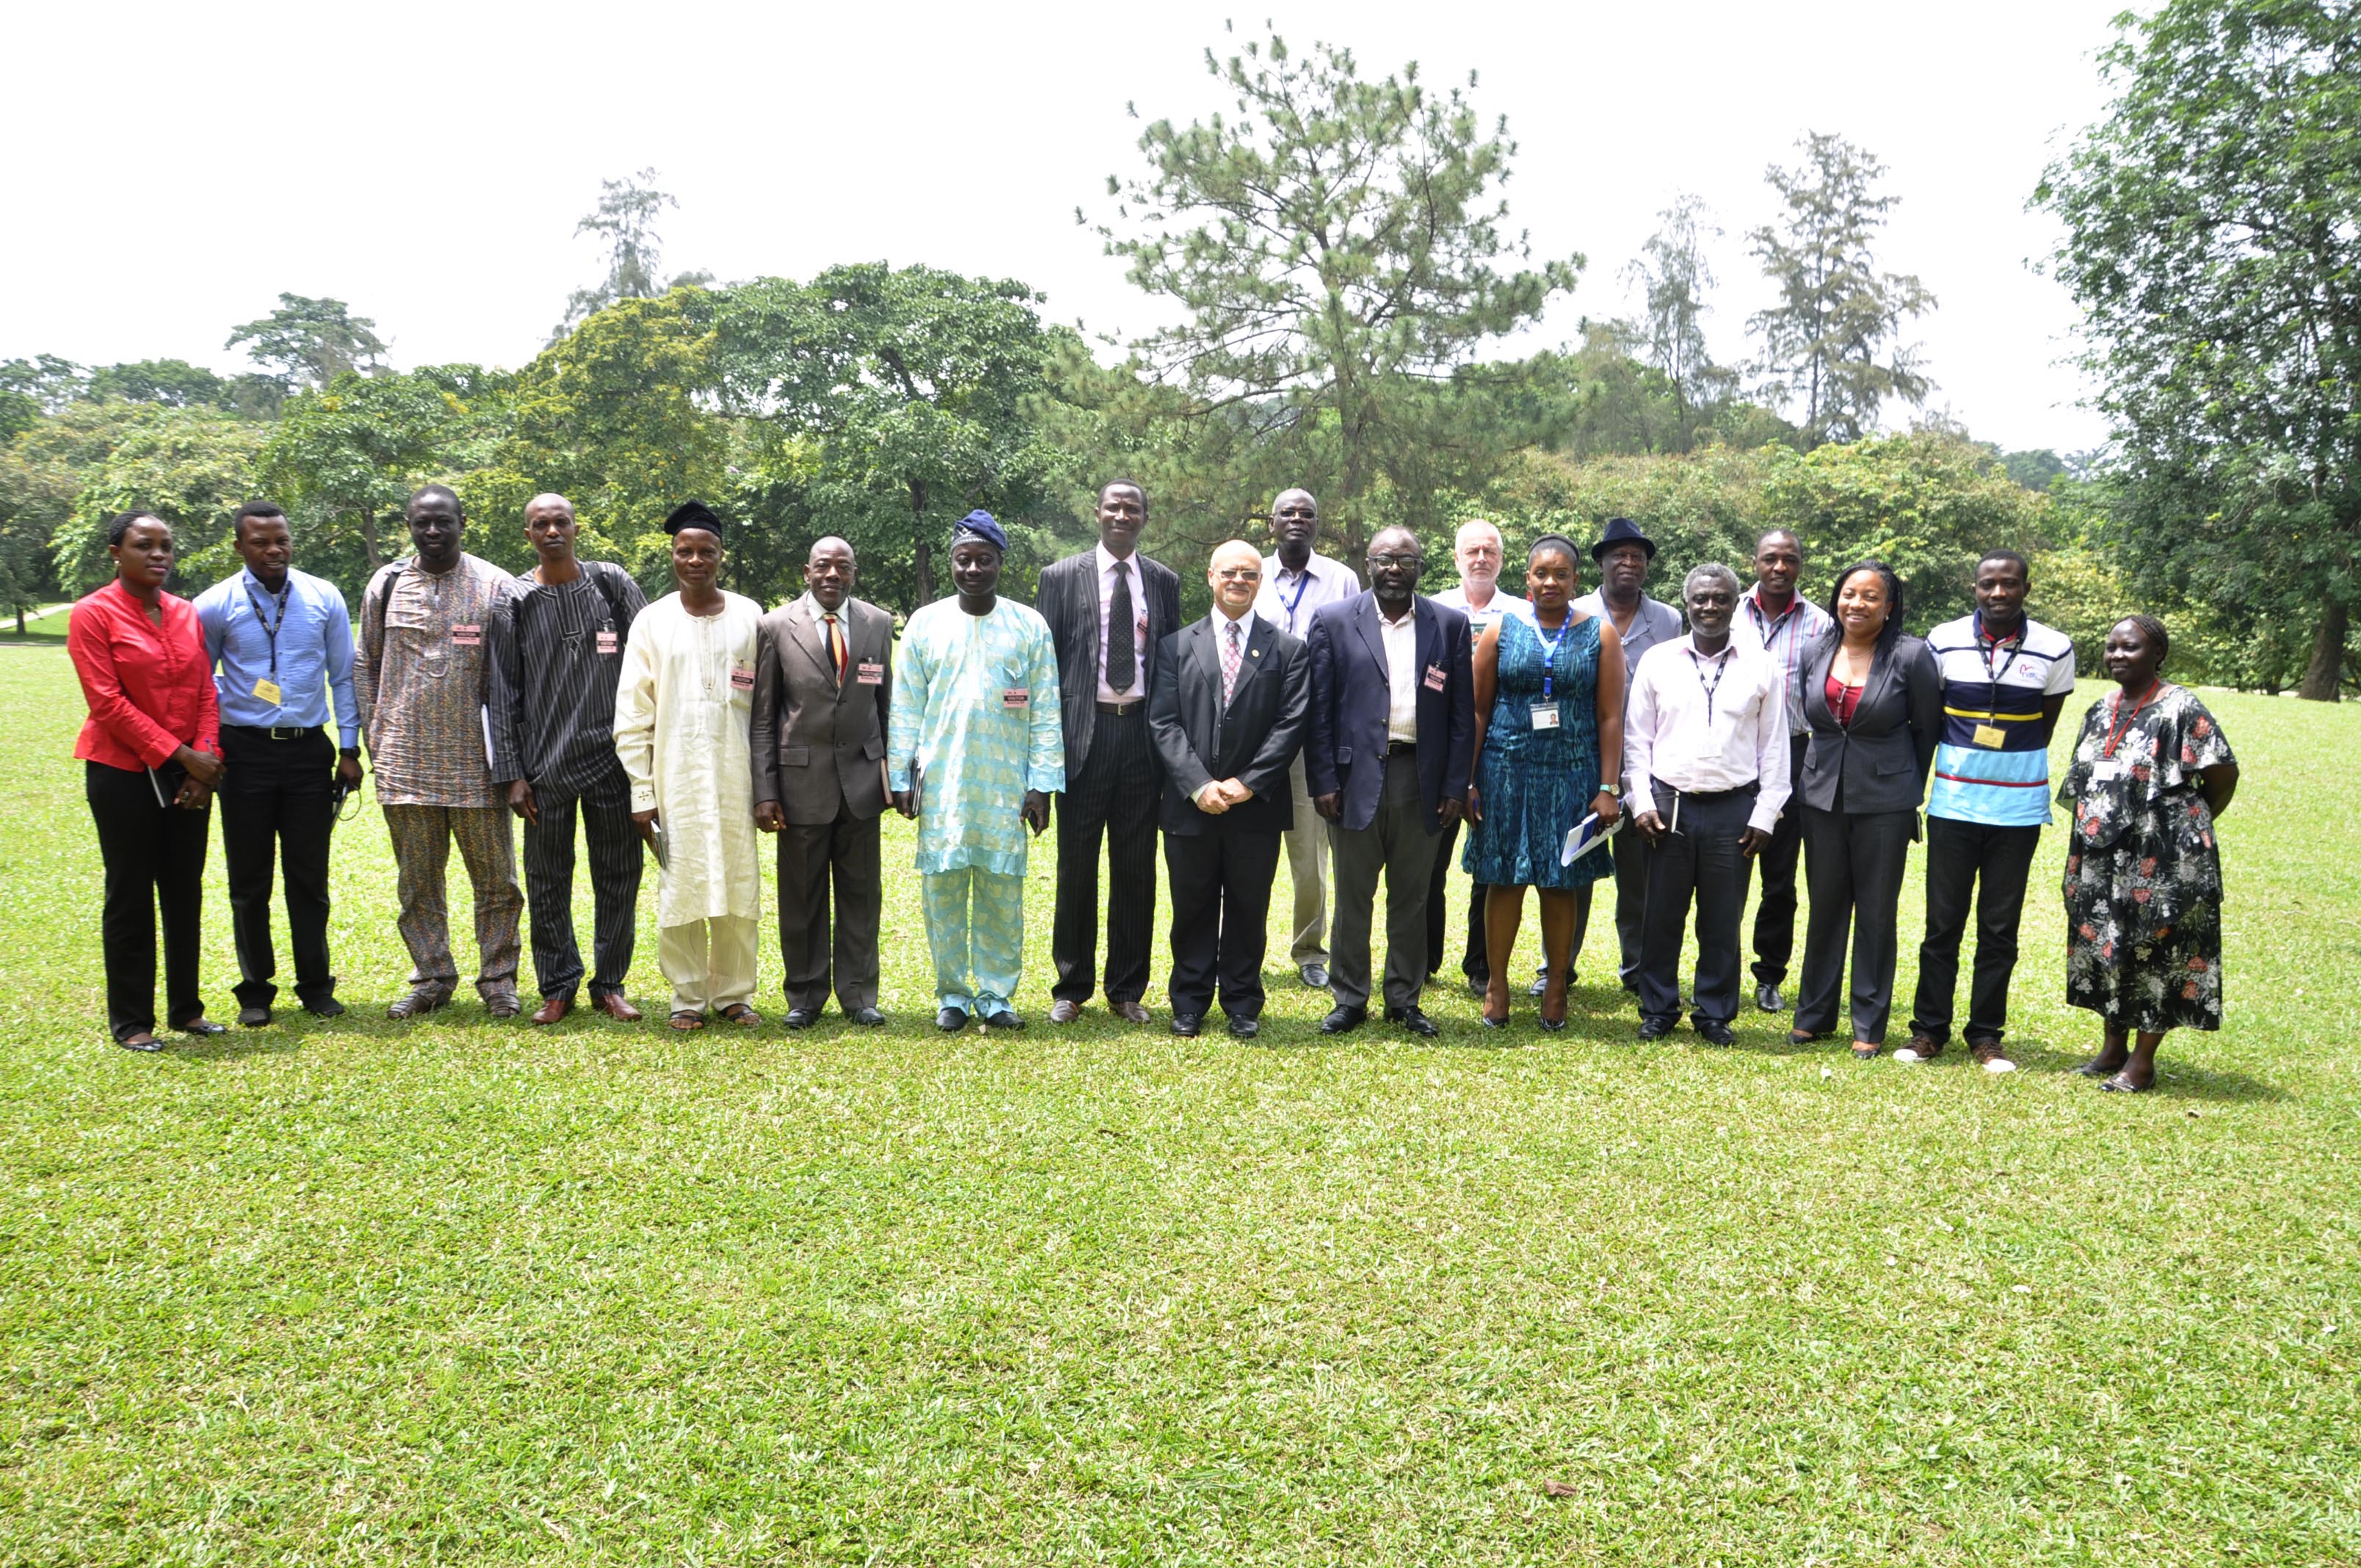 The delegates from the State of Osun (third-eighth and eleventh from left) flanked by IITA scientists and members of staff.